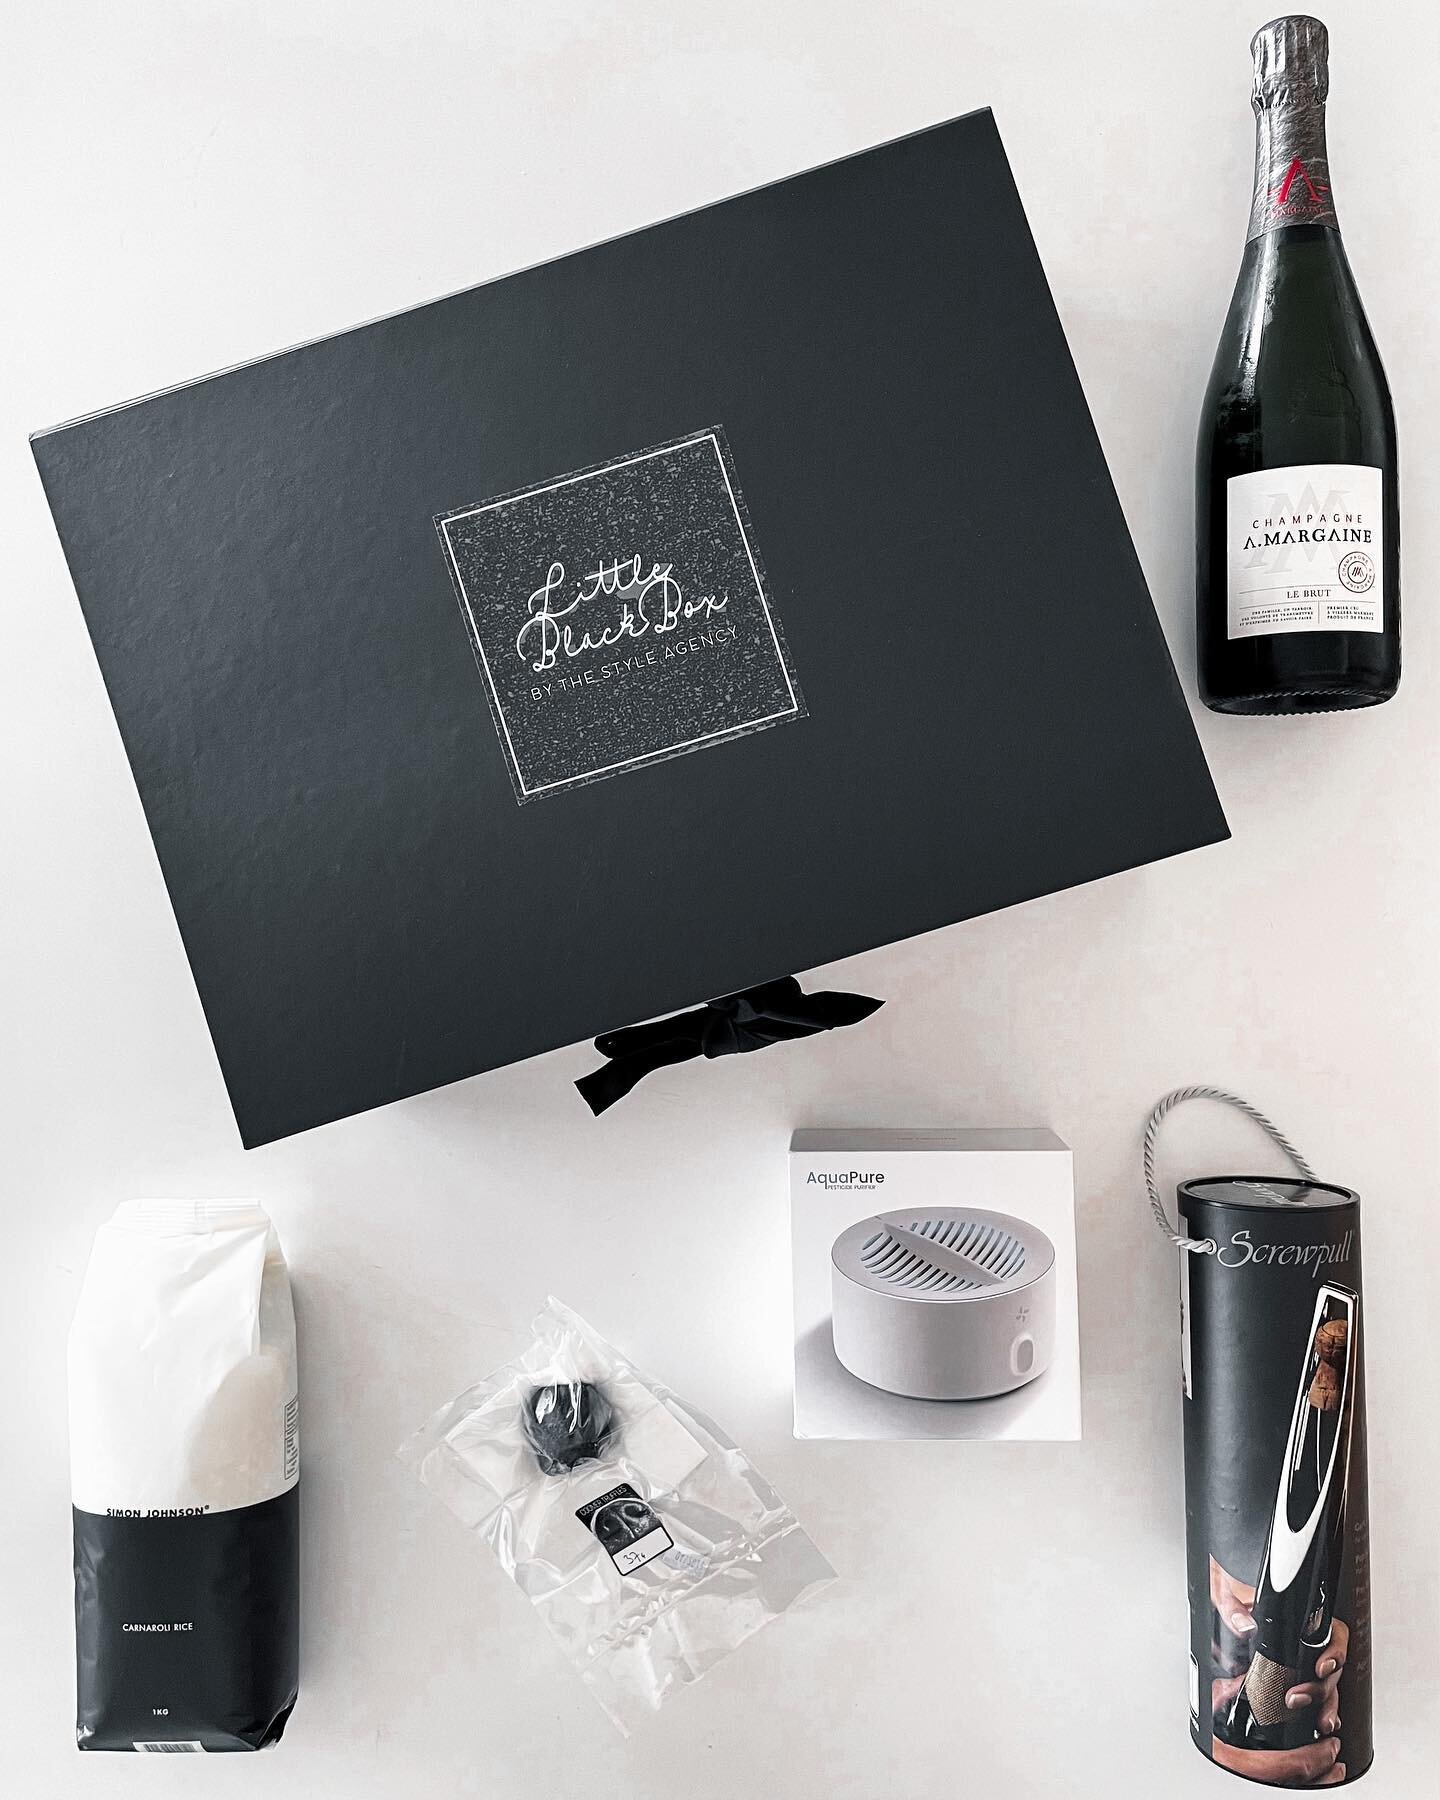 Our Settlement Boxes are a stylishly luxe way of saying &ldquo;congratulations on your new home&rdquo;.

Affordable, standout and personally tailored to the recipient, a Settlement Little Black Box is bound to impress even the most discerning of peop